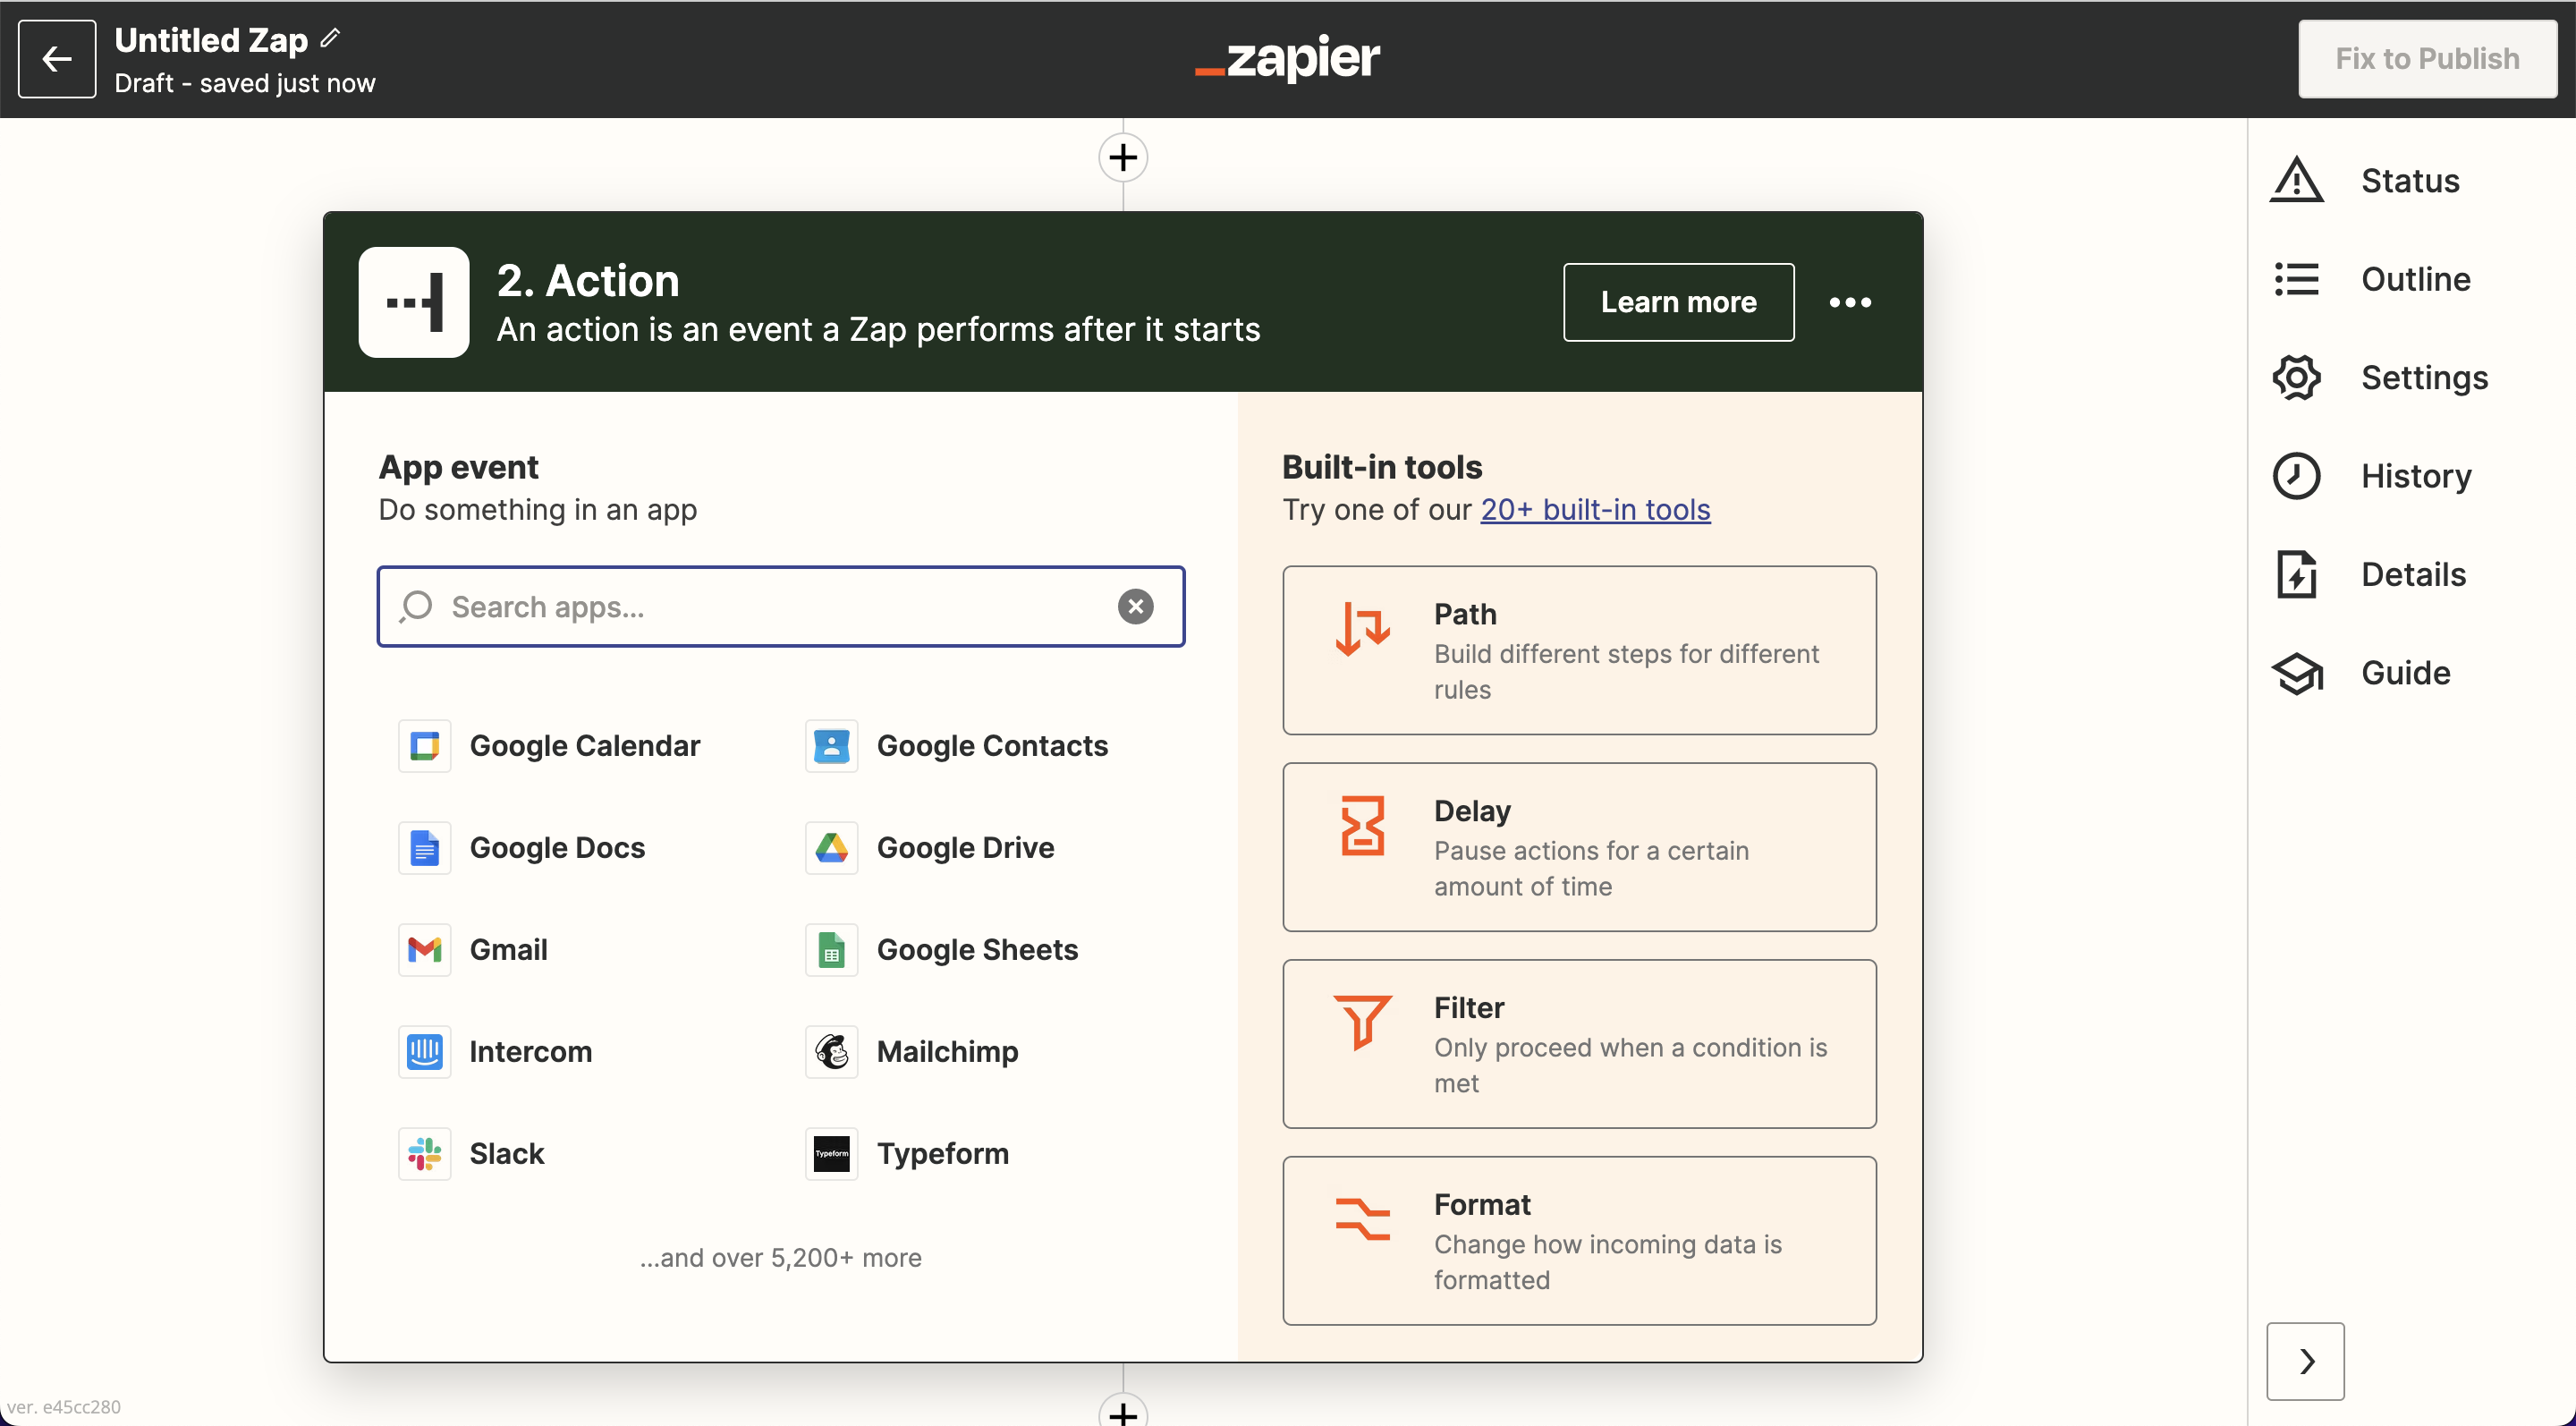 Add an action using Zapier’s collection of apps and built-in tools.